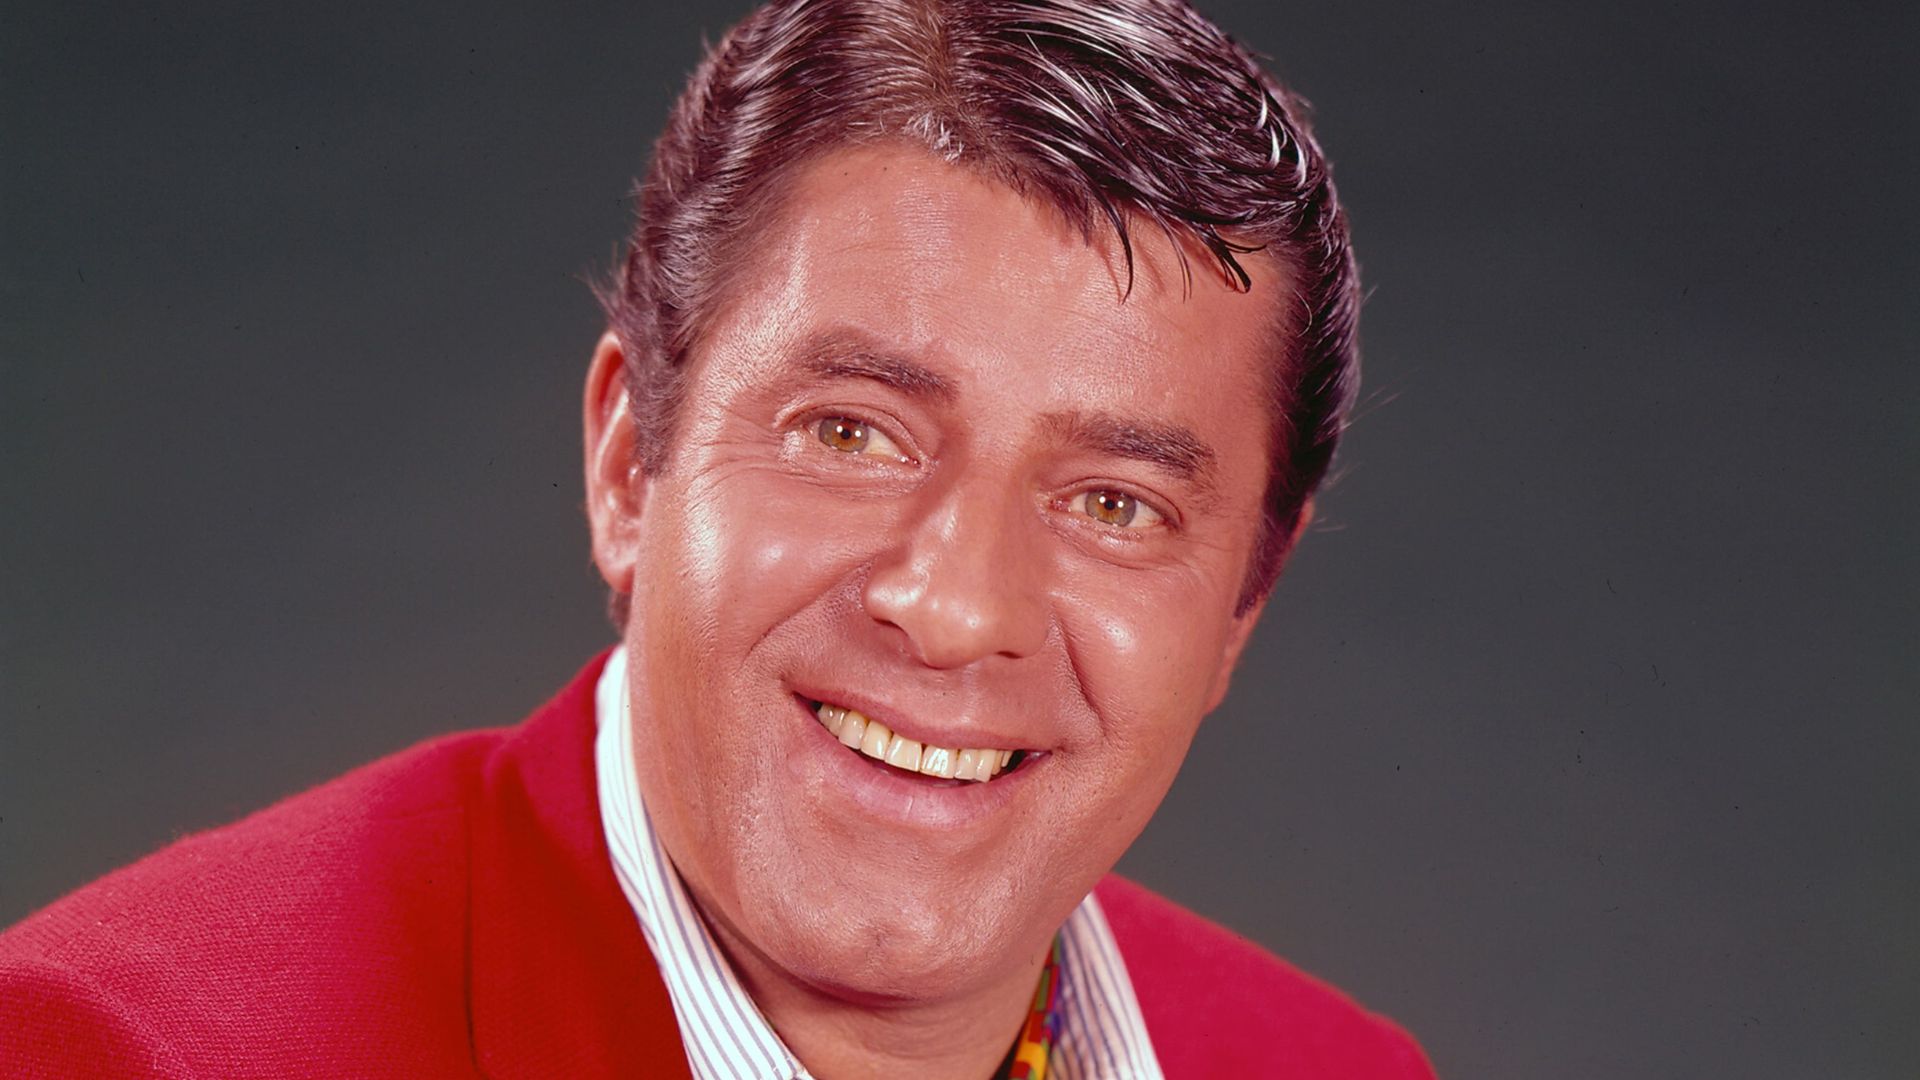 Jerry Lewis In Red